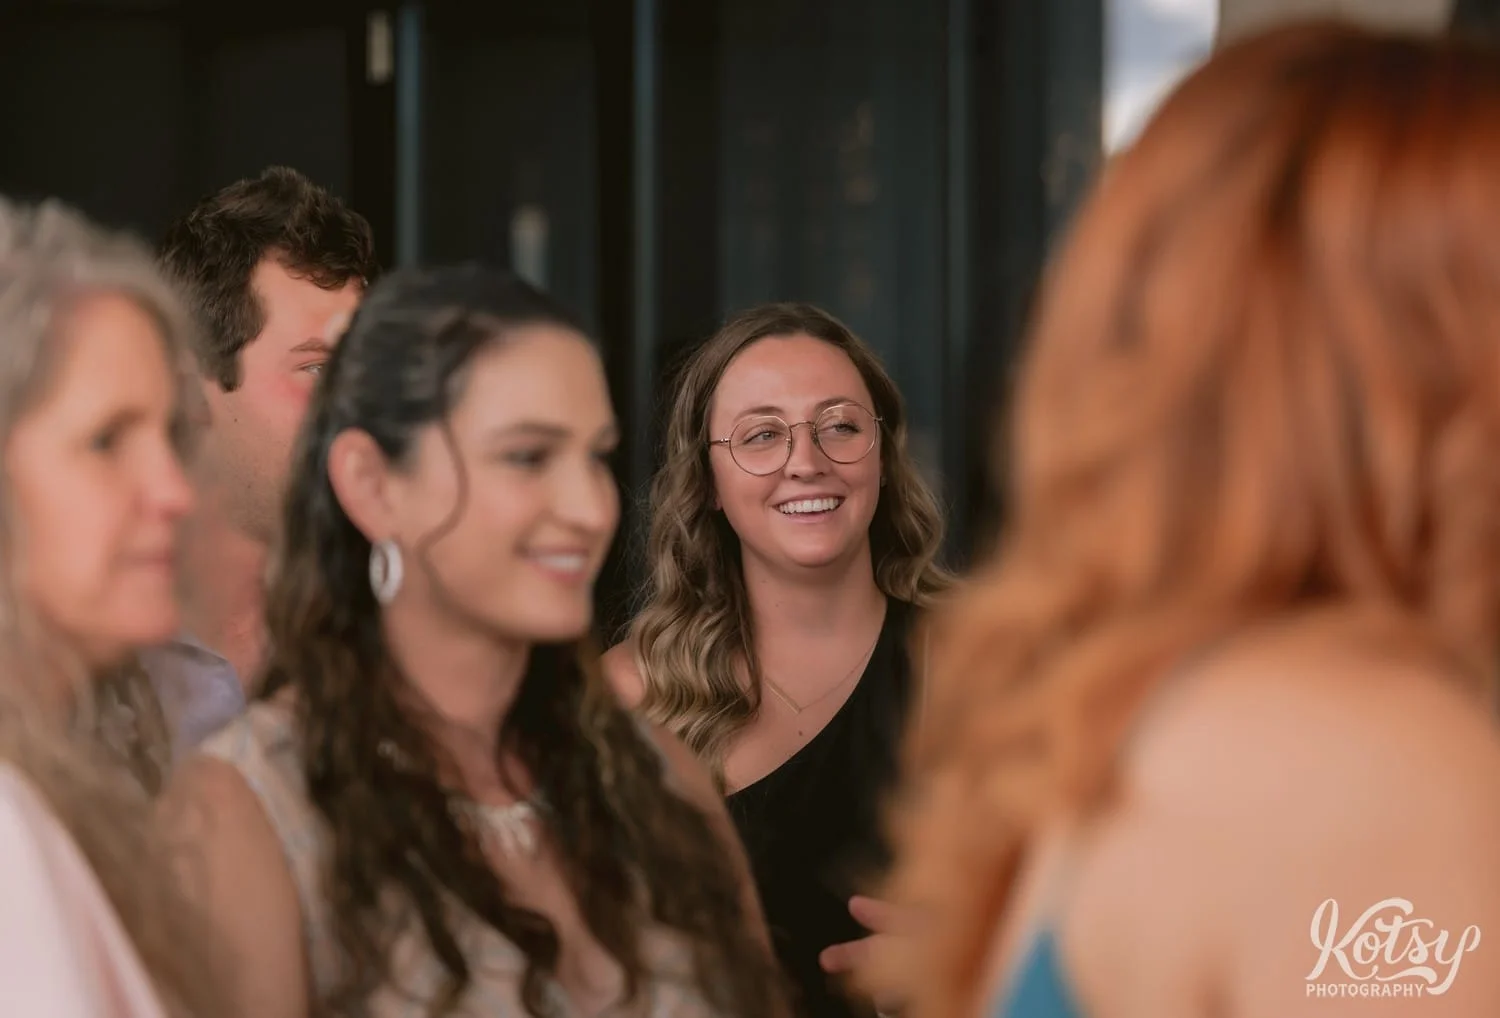 A smiling woman is seen through a group of people during cocktail hour at a Village Loft wedding reception in Toronto, Canada